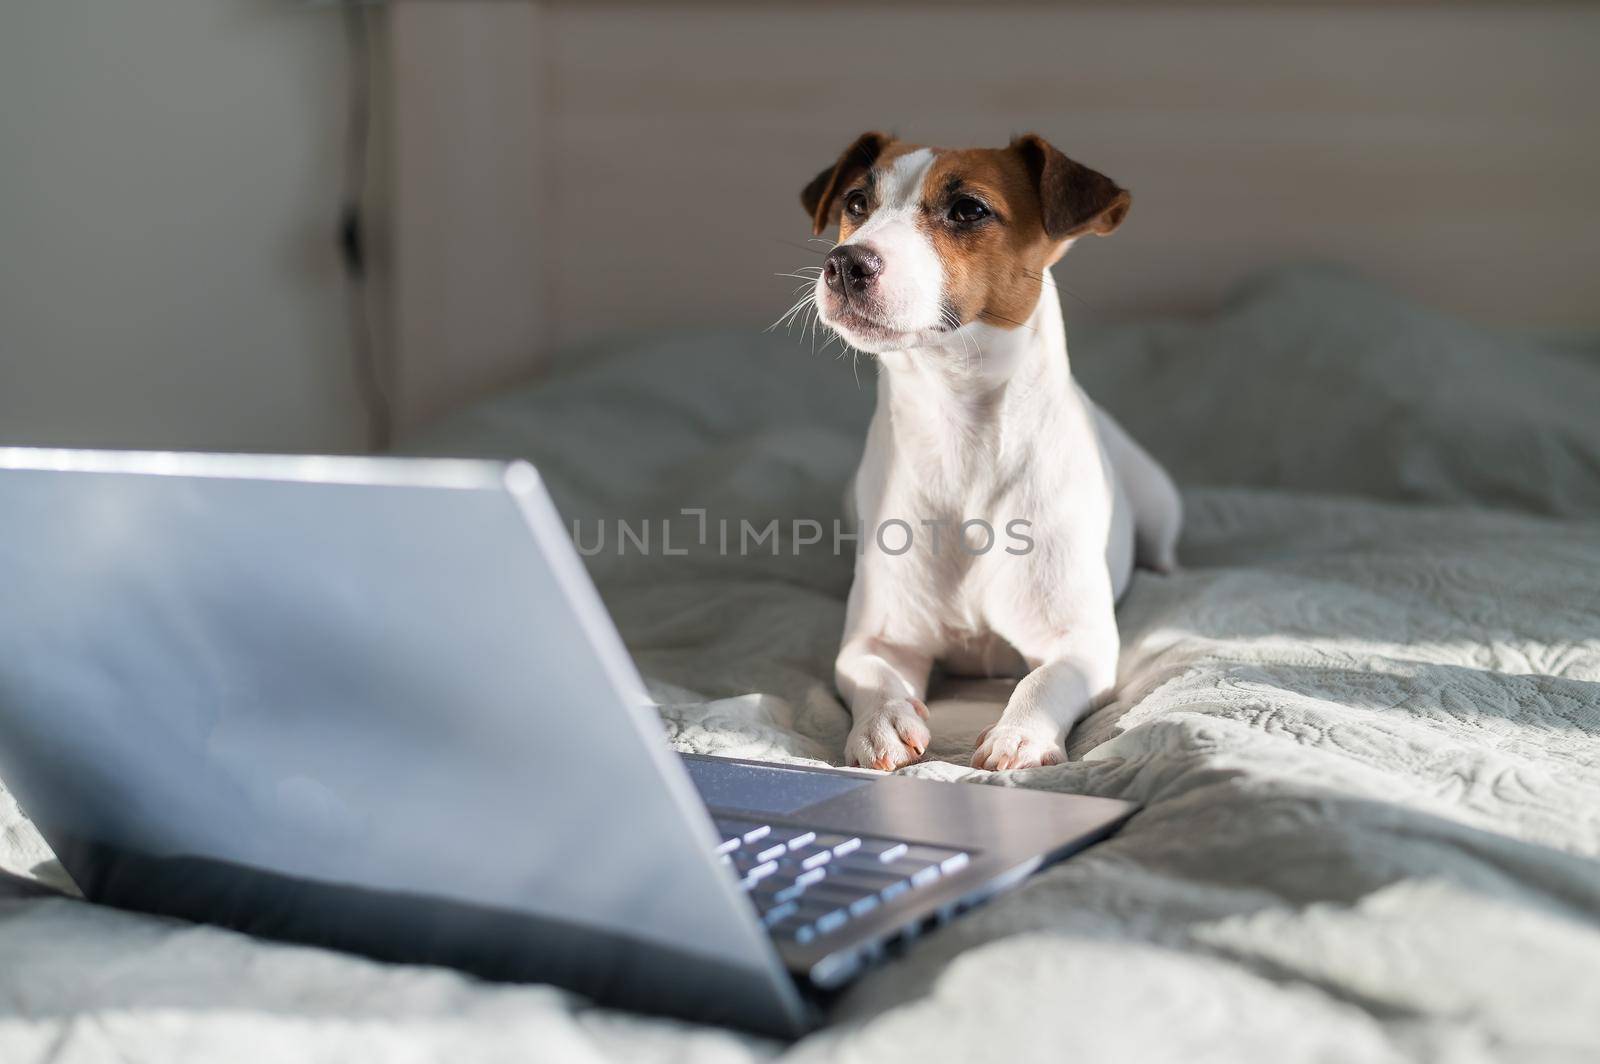 Smart dog jack russell terrier lies on the bed by the laptop. by mrwed54